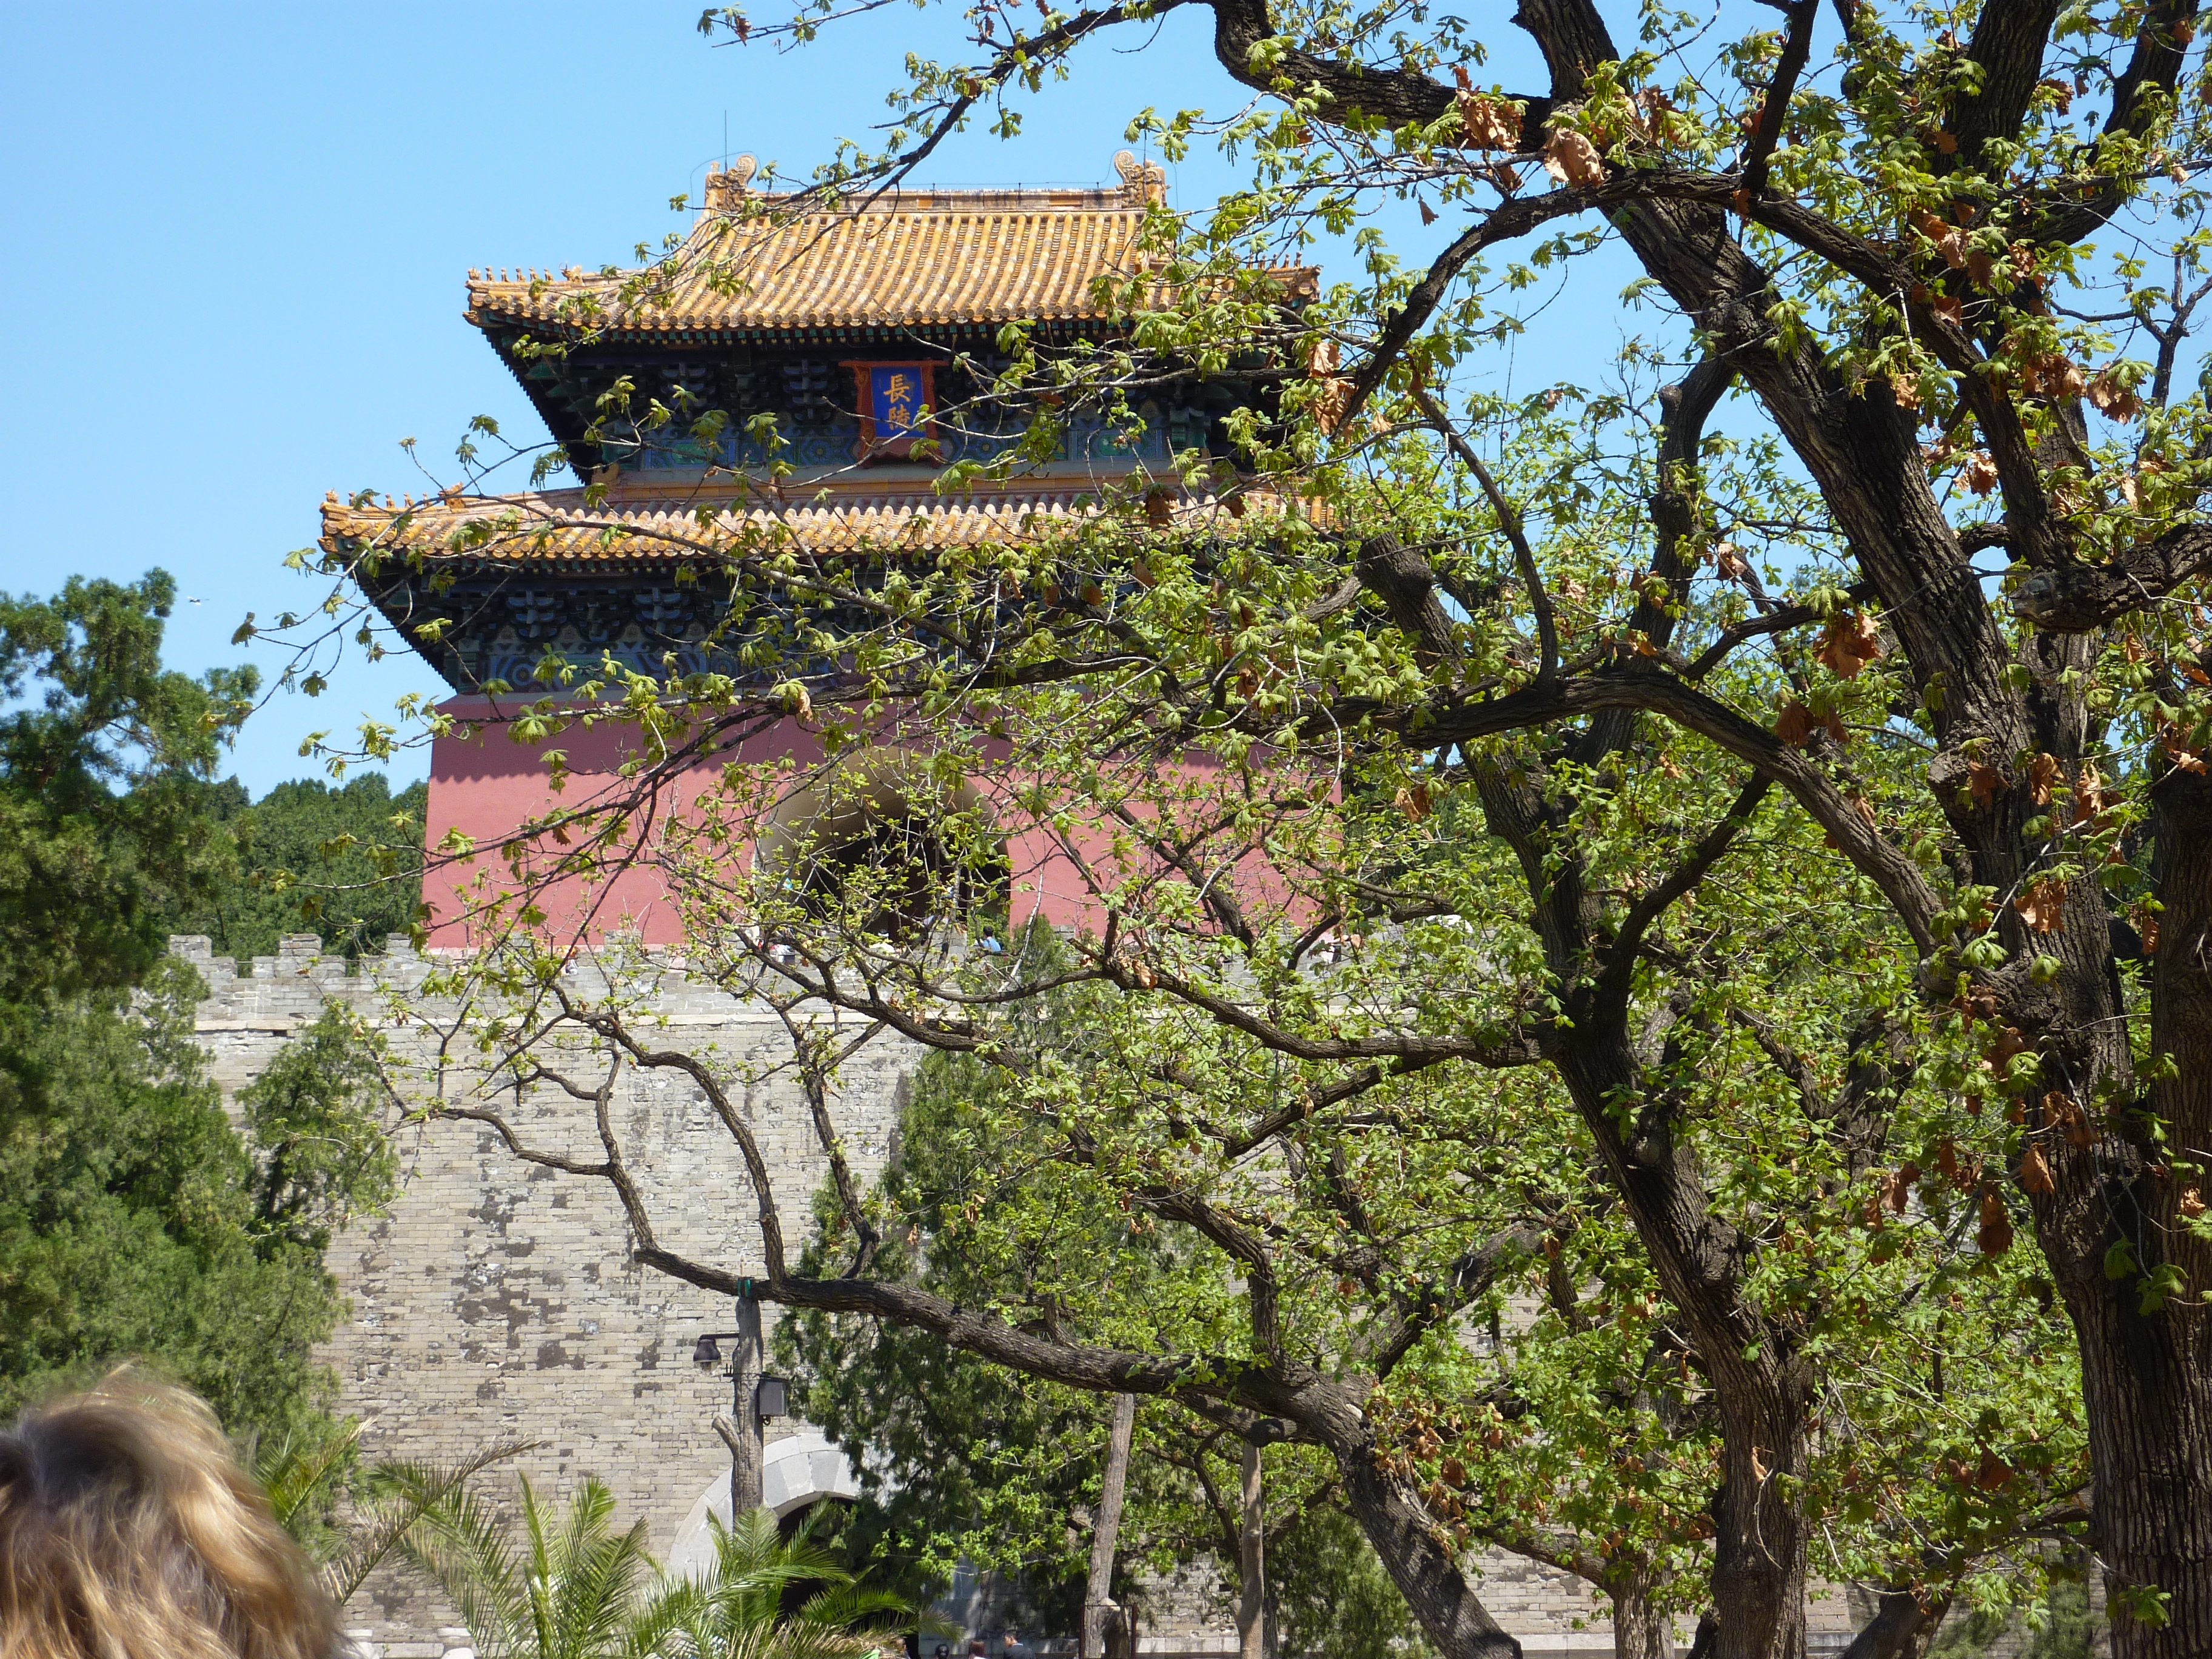 Ming Dynasty tomb